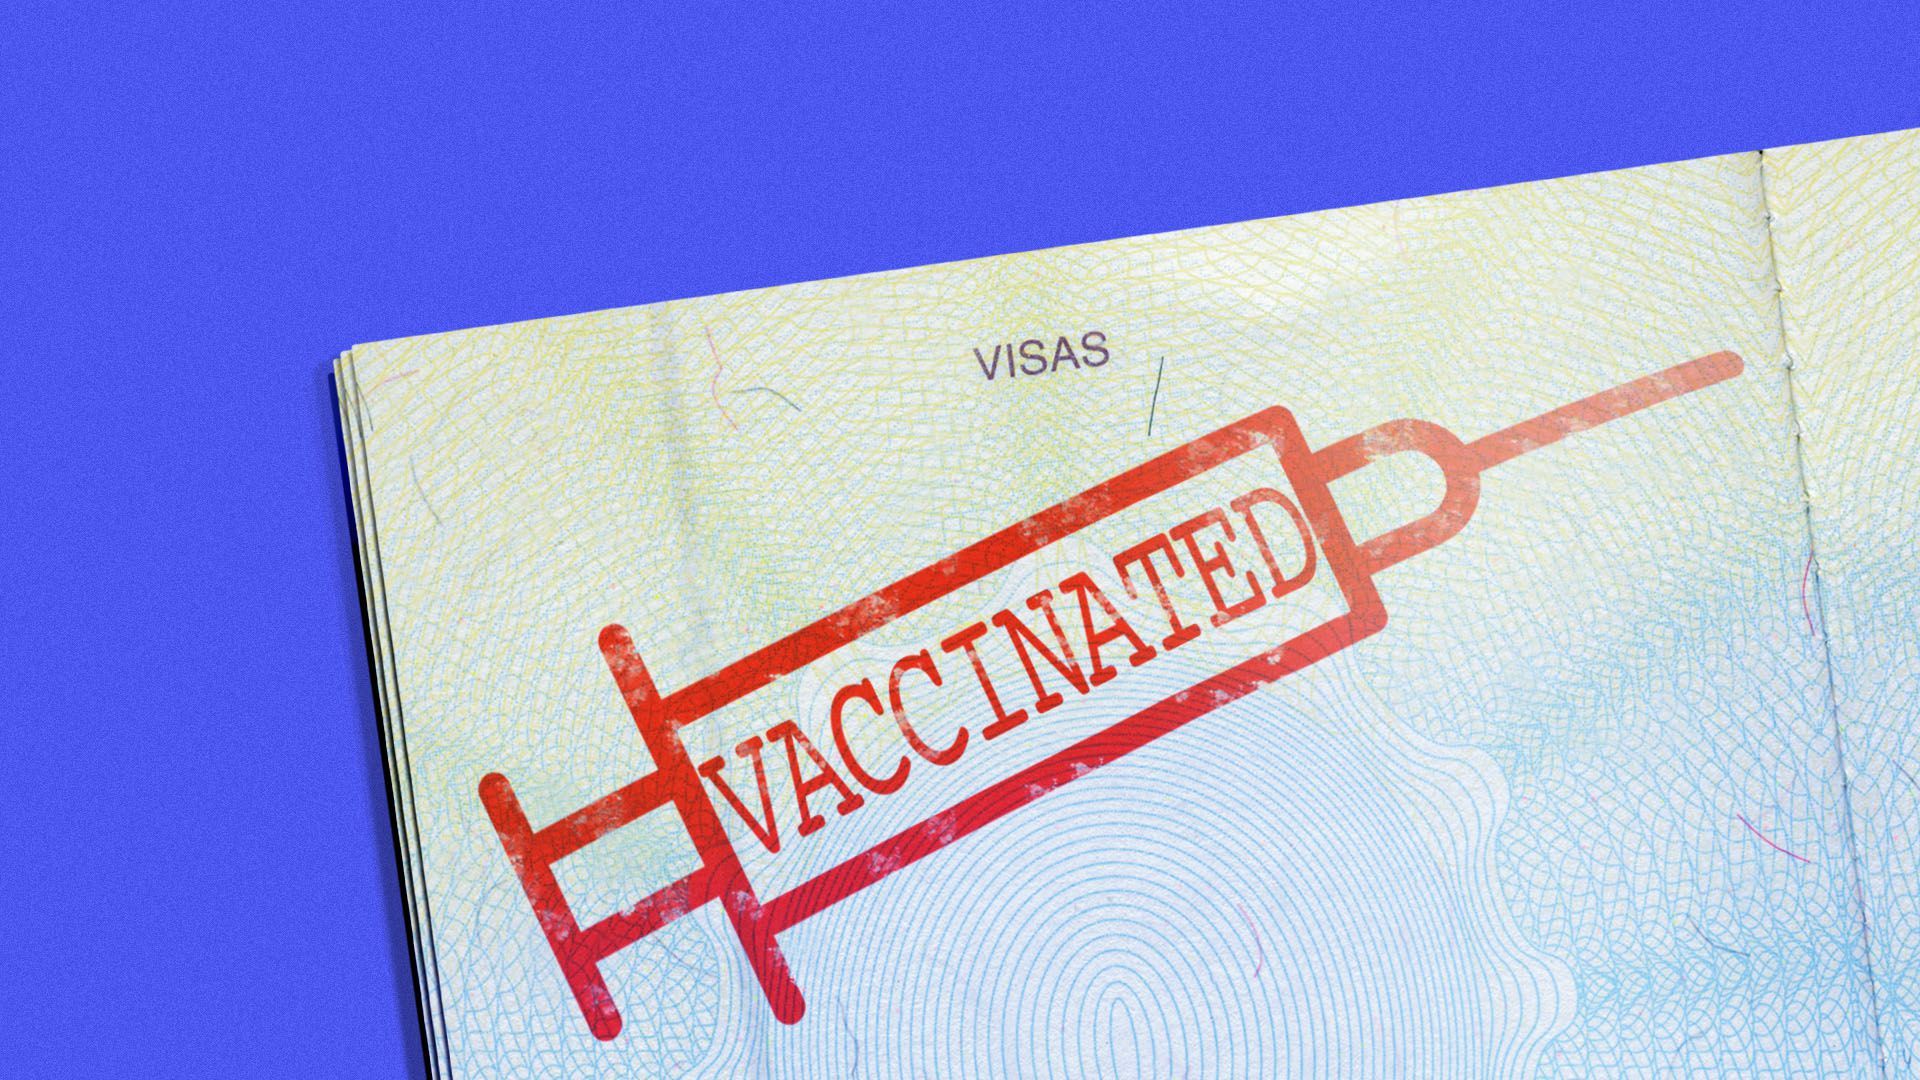 Illustration of a passport with a stamp on it shaped like a syringe that reads "vaccinated"